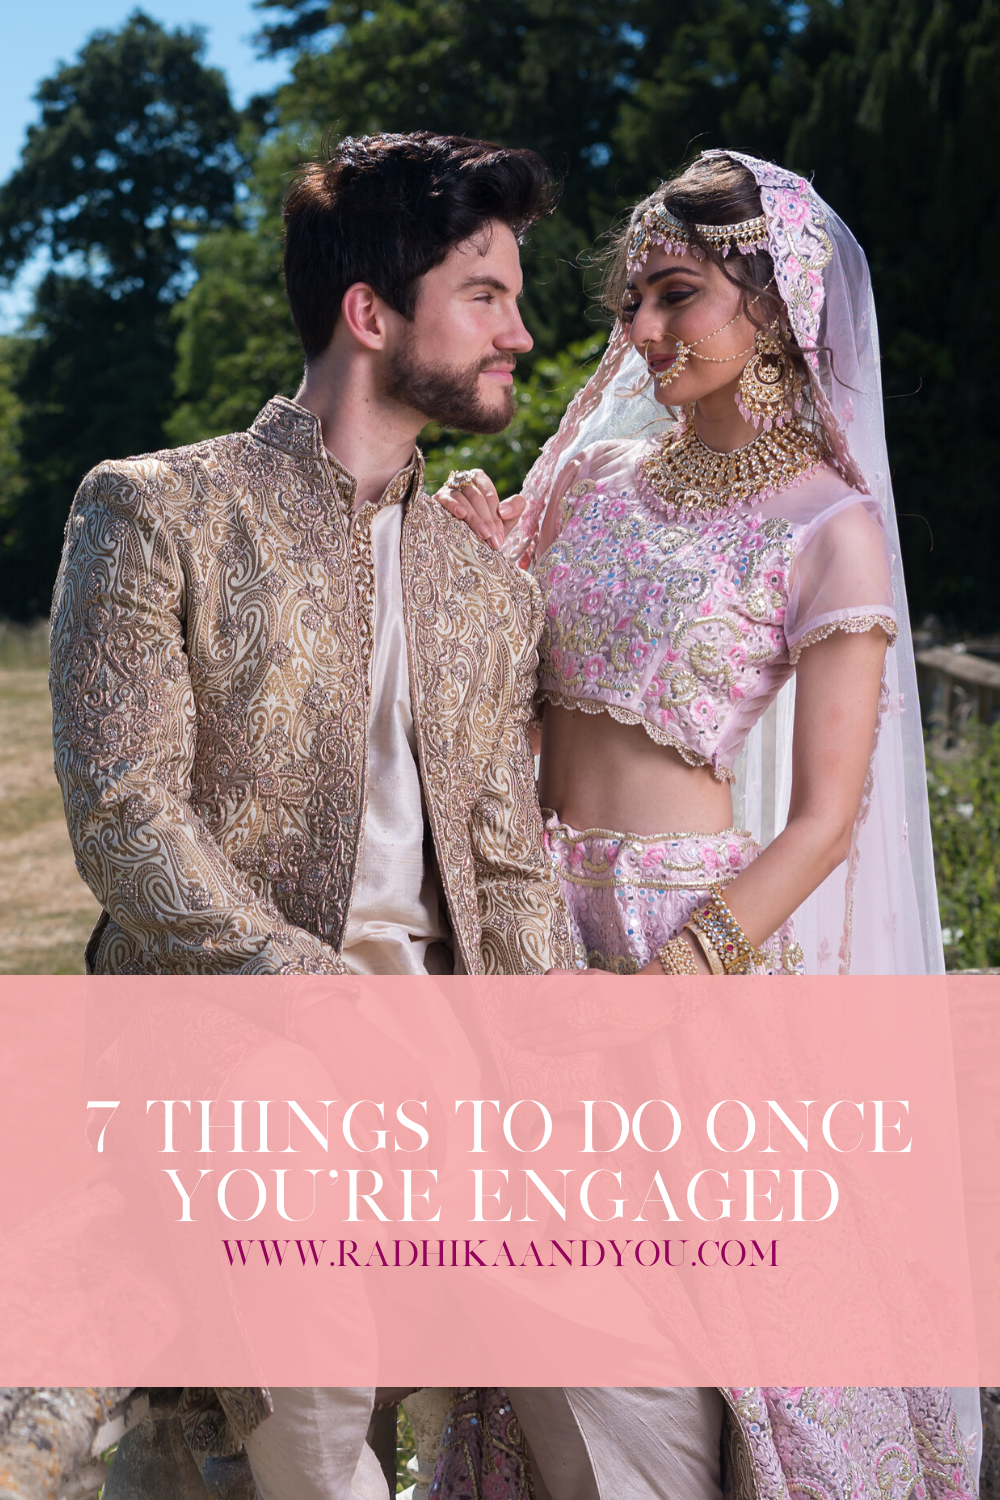 radhikaandyou-7-things-to-do-once-you-are-engaged